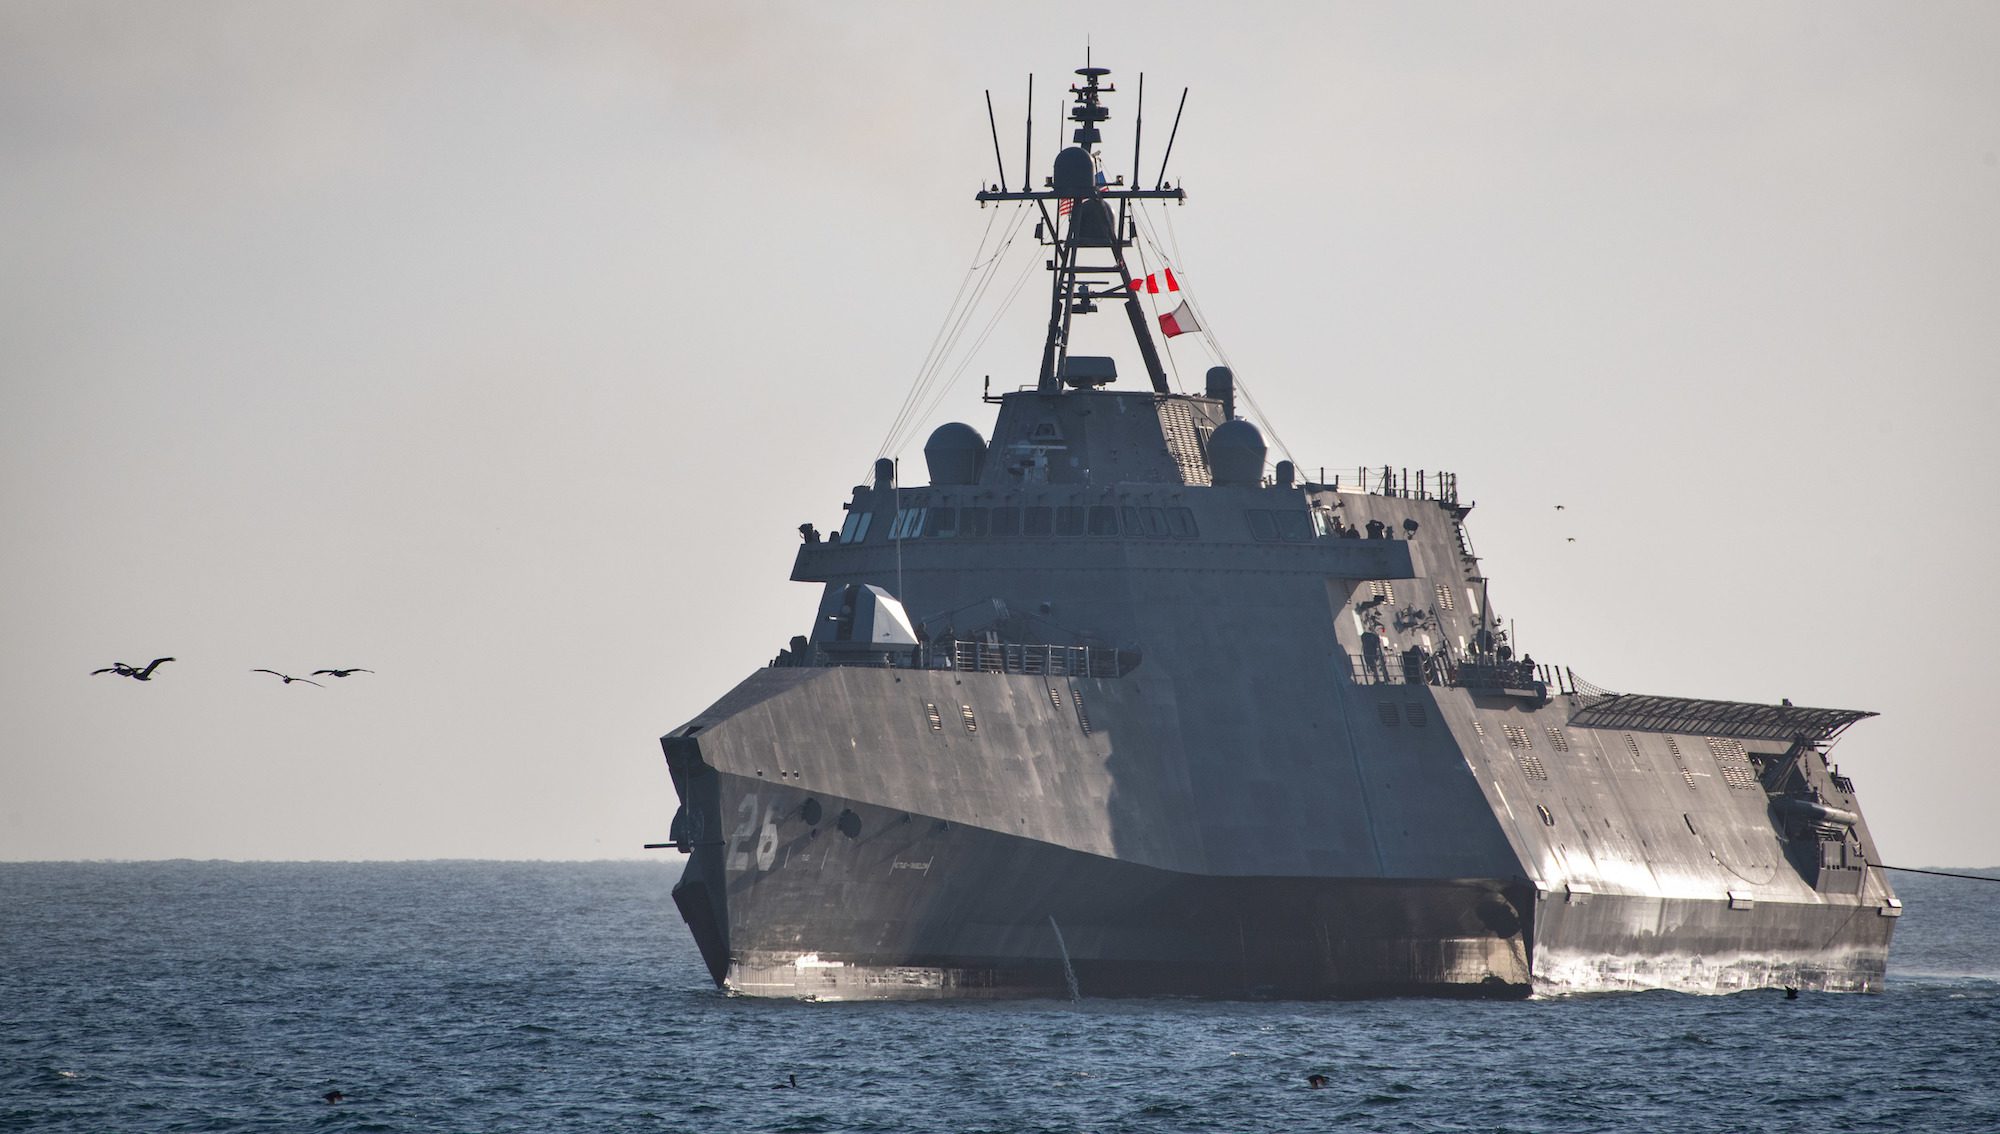 U.S. Navy Sends LCS to Enforce Fishing Laws in Western Pacific